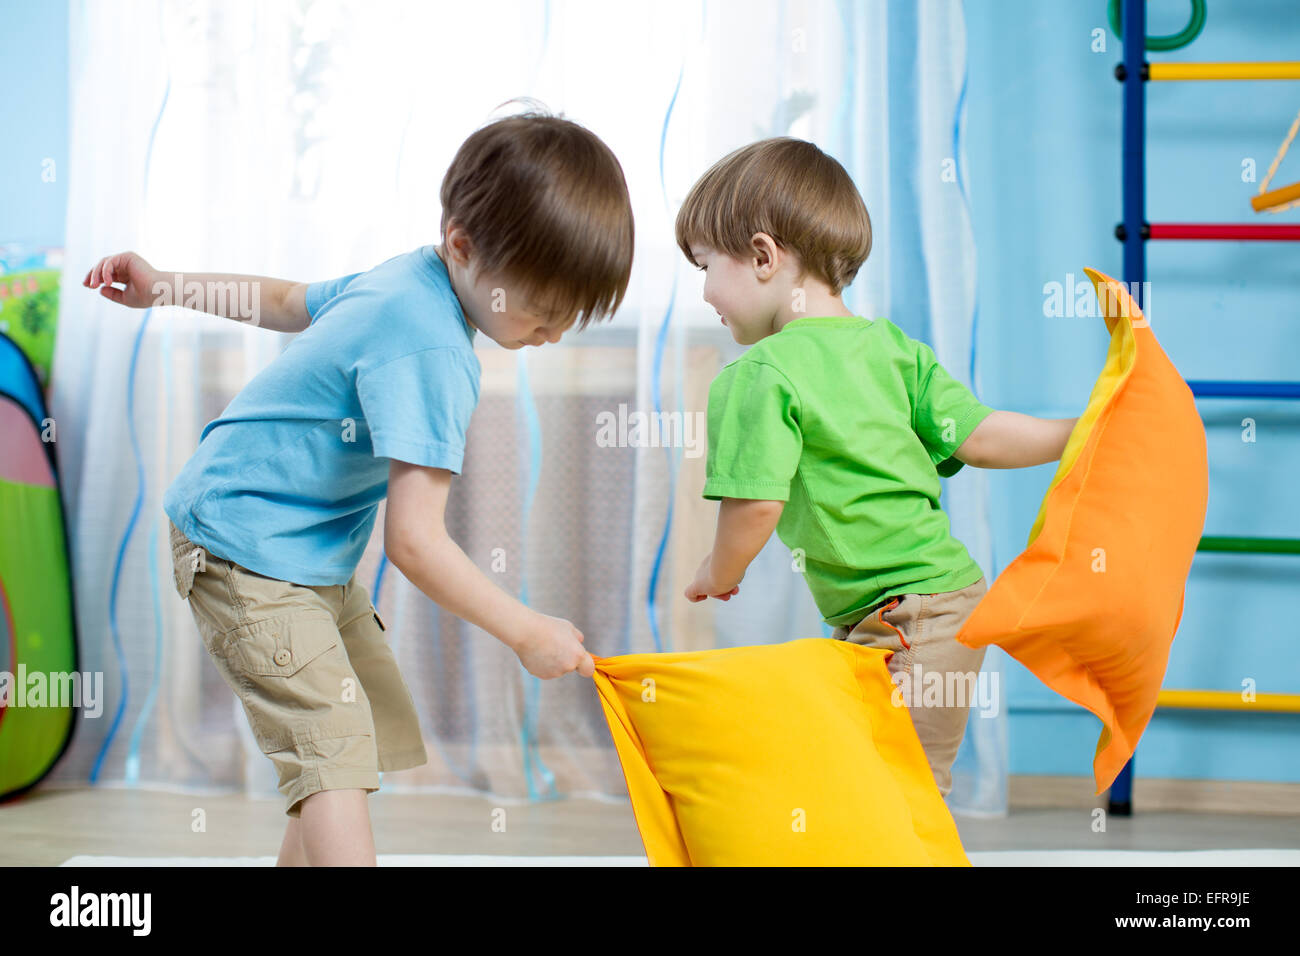 Two kids playing with pillows Stock Photo